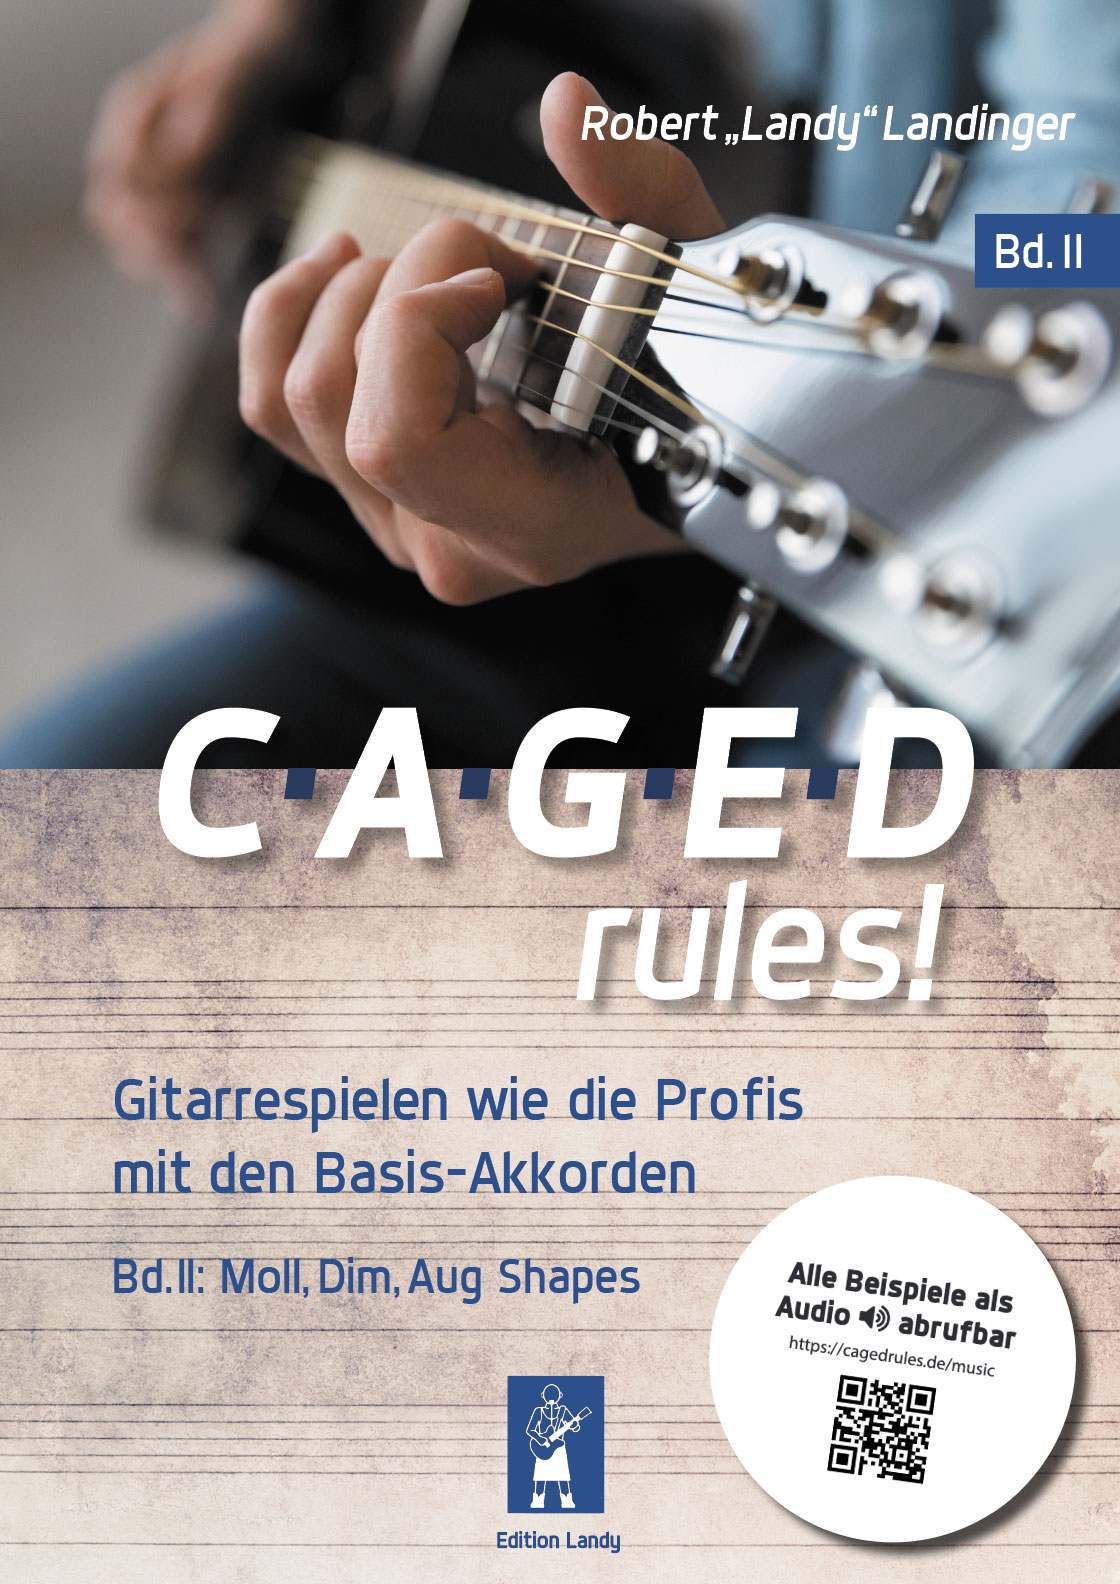 Caged rules 2